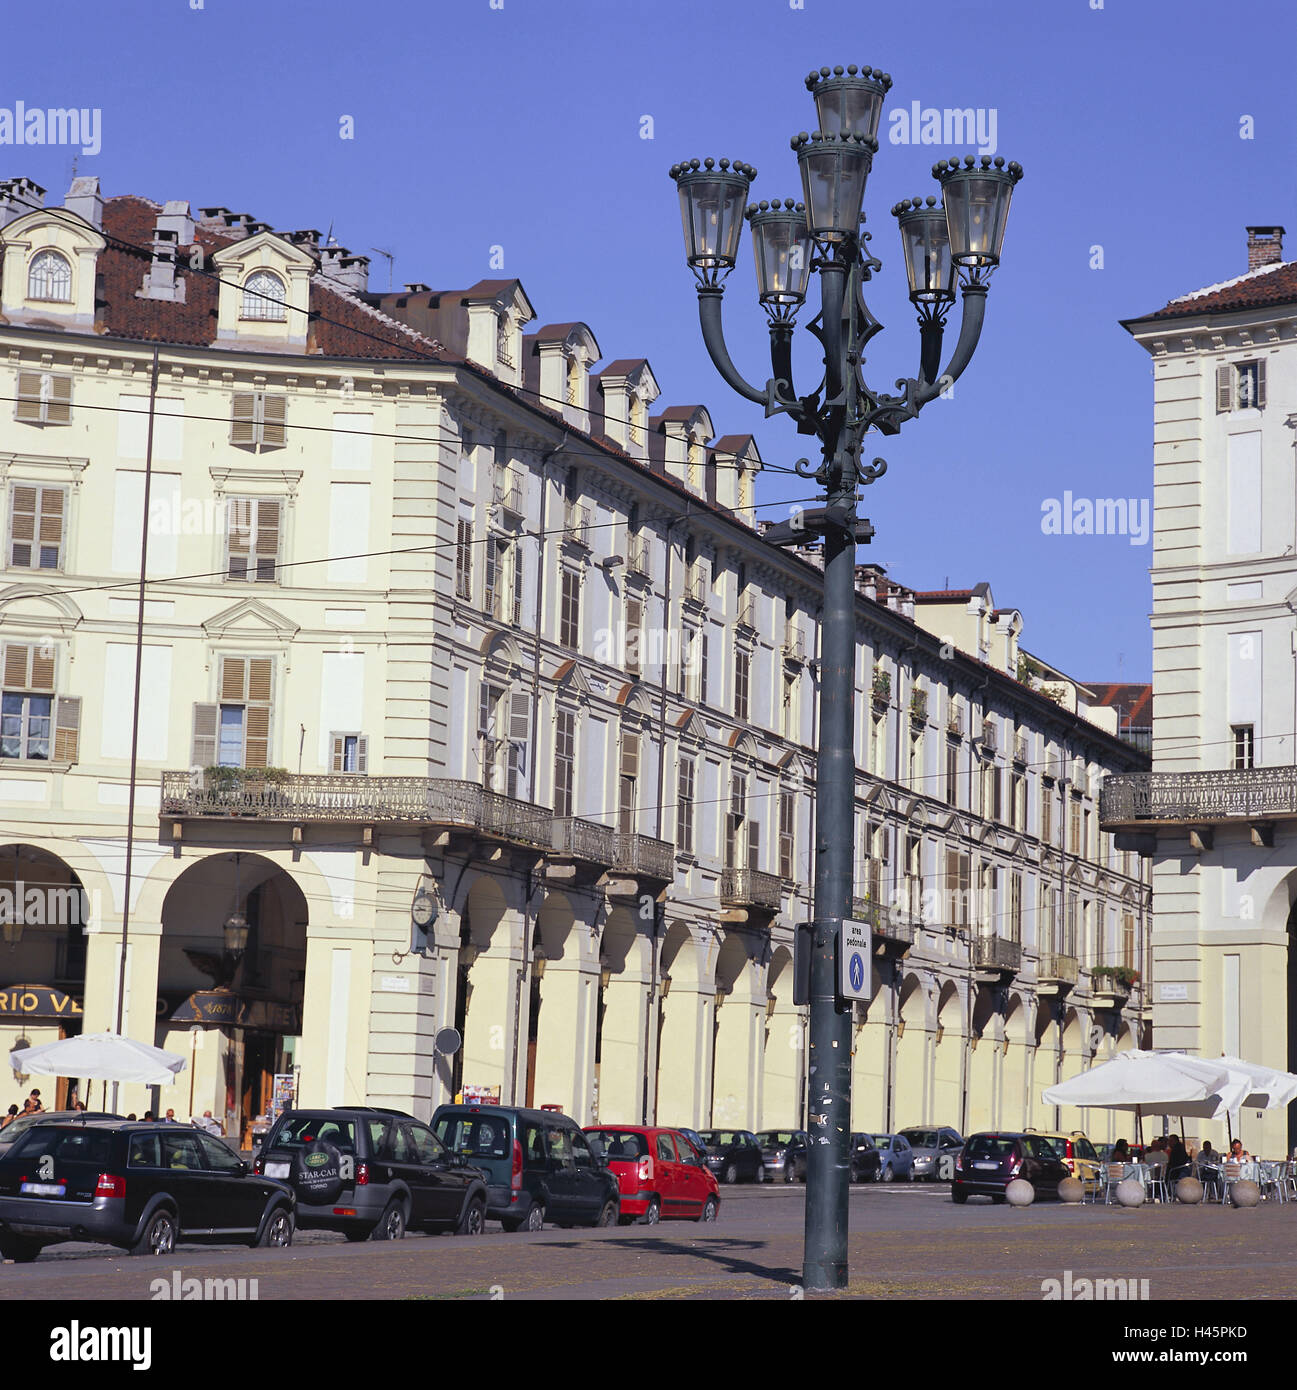 Italy, Piedmont, Turin, via bottom, building, arcades, cars, lantern, town, destination, place of interest, architecture, curves, round arches, arcade, street lamp, street cafe, person, Stock Photo